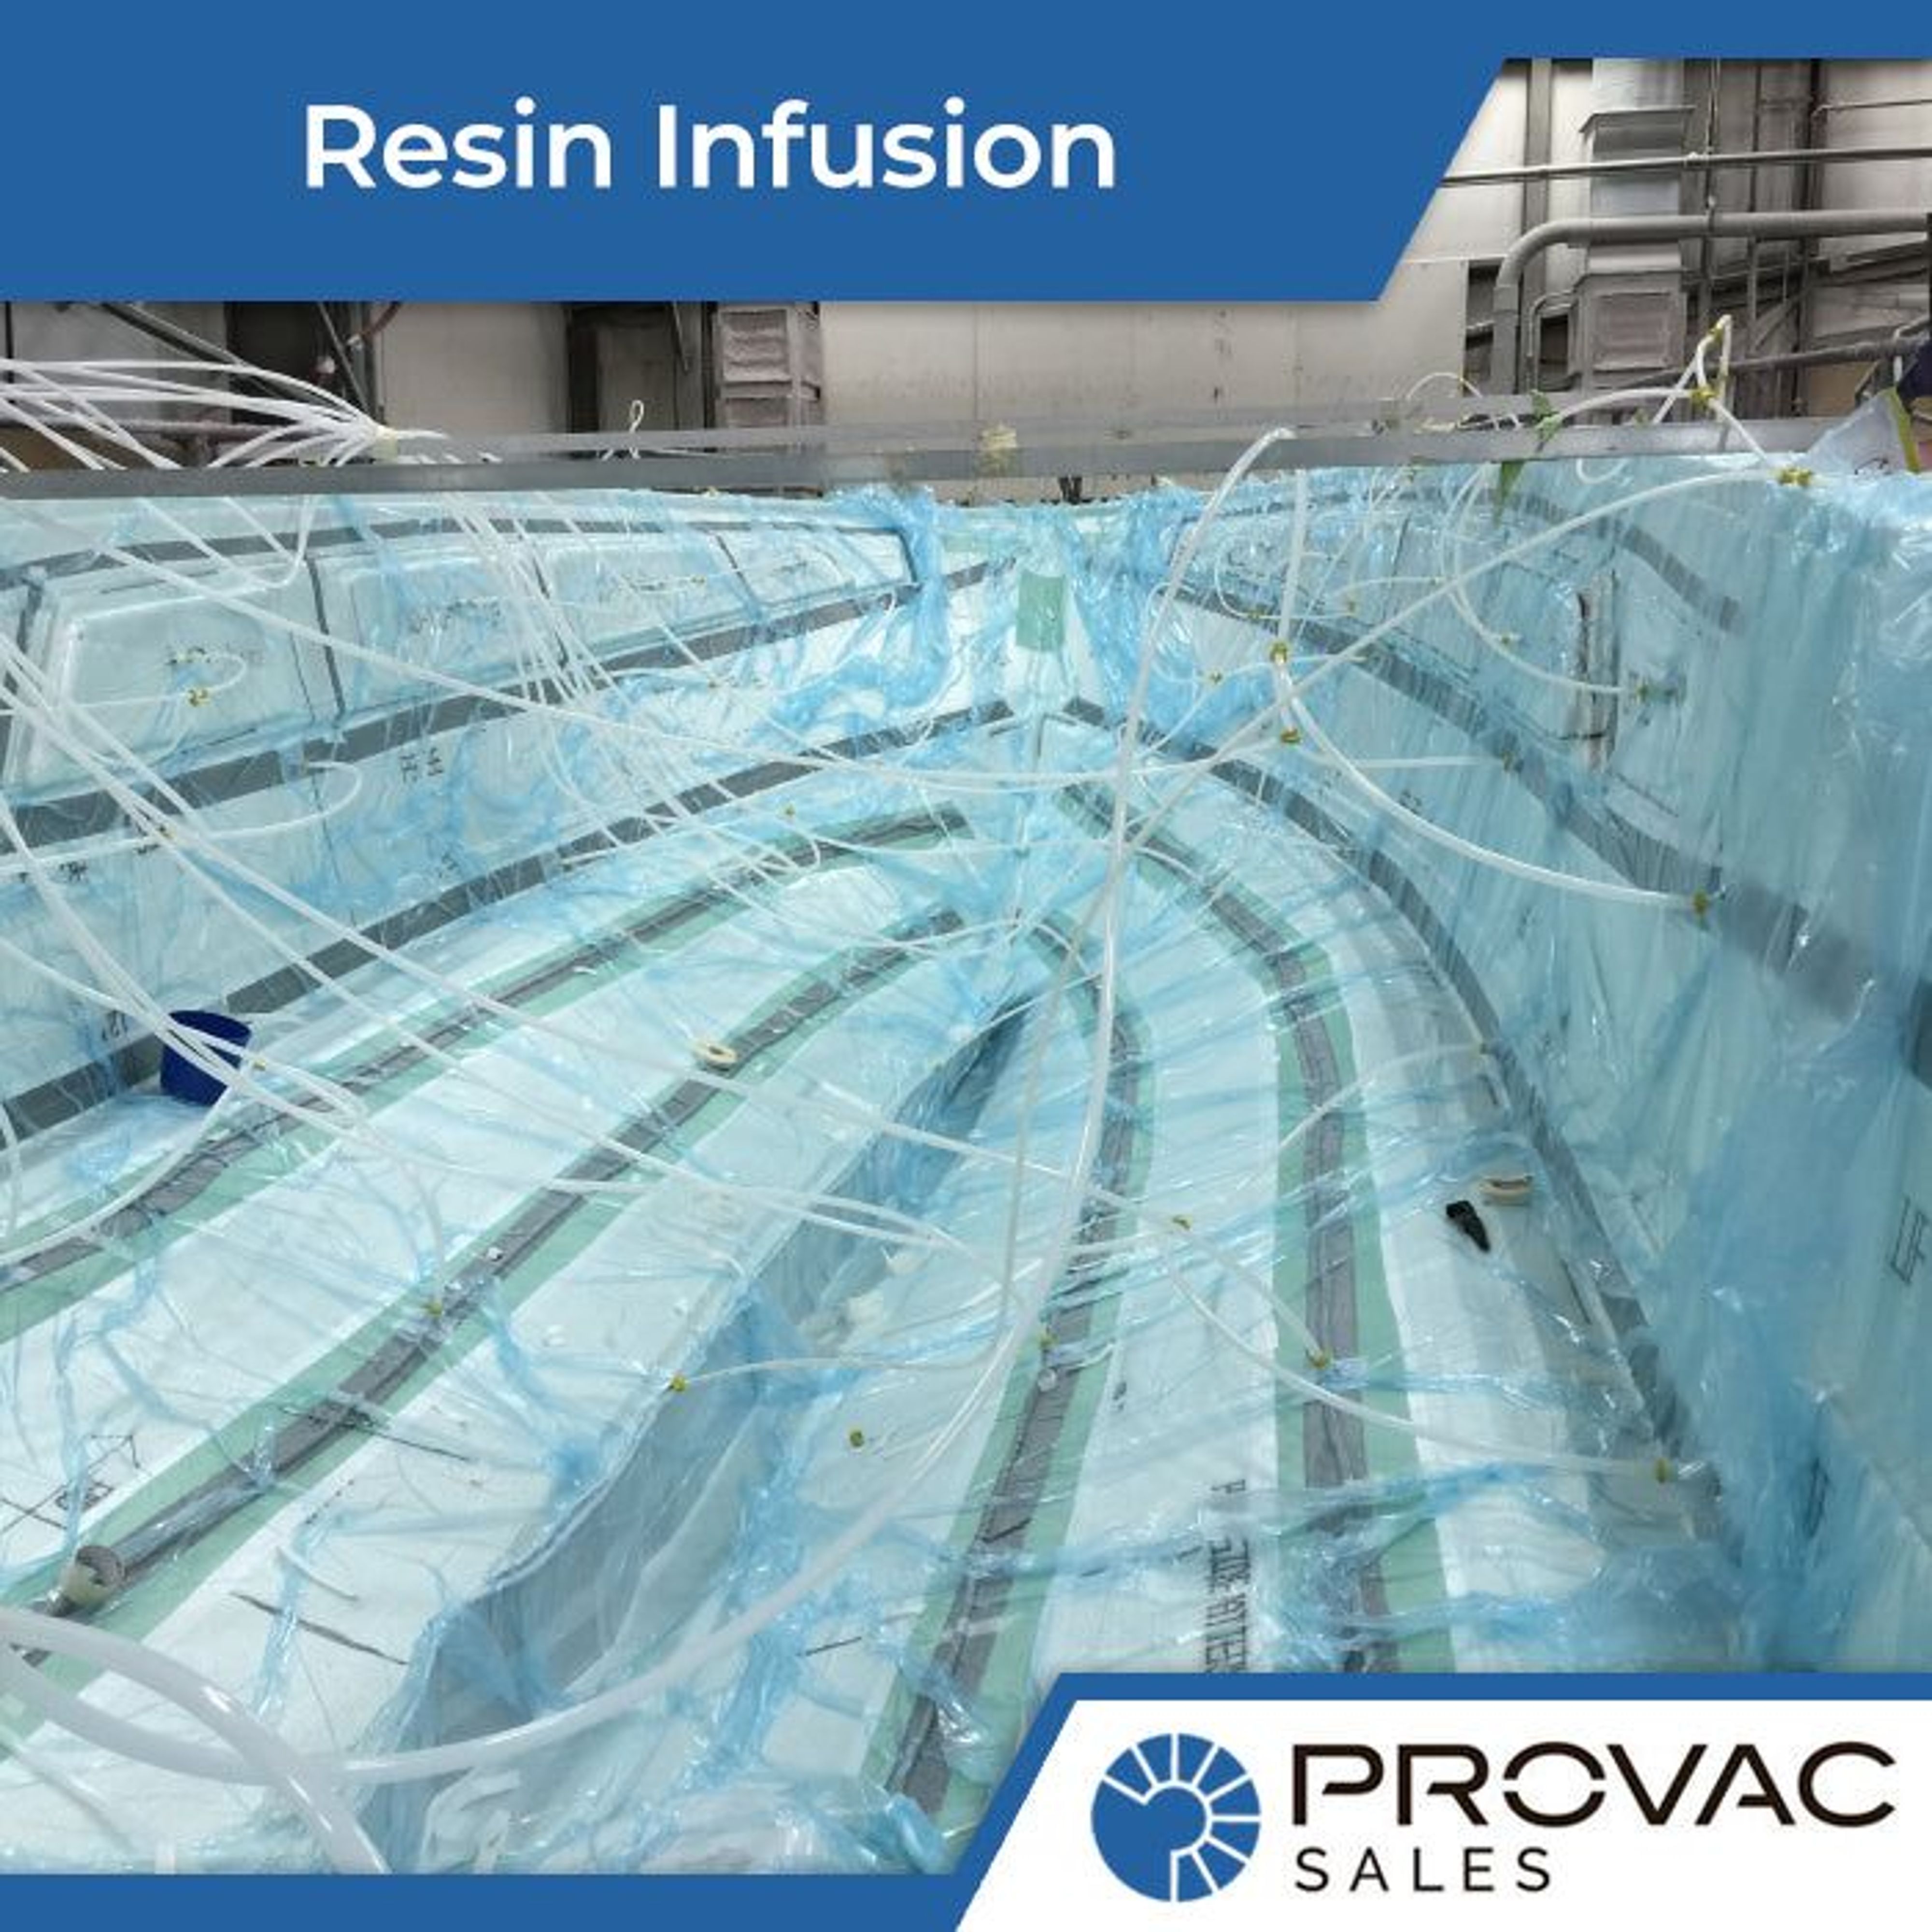 Vacuum Pumps for Resin Infusion Background